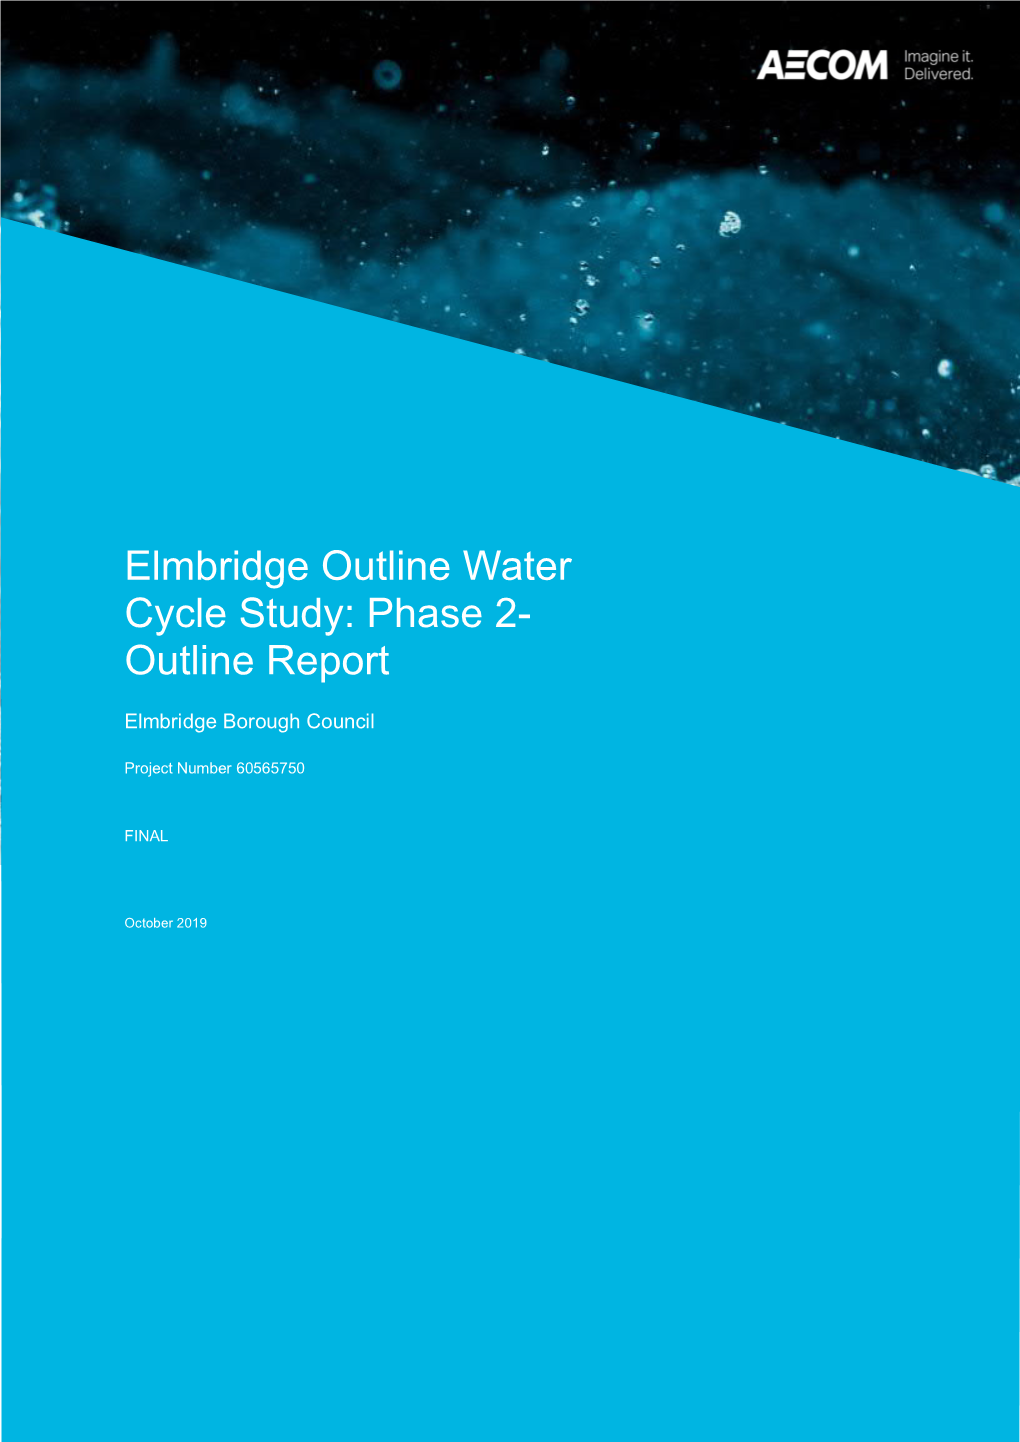 Elmbridge Outline Water Cycle Study: Phase 2- Outline Report